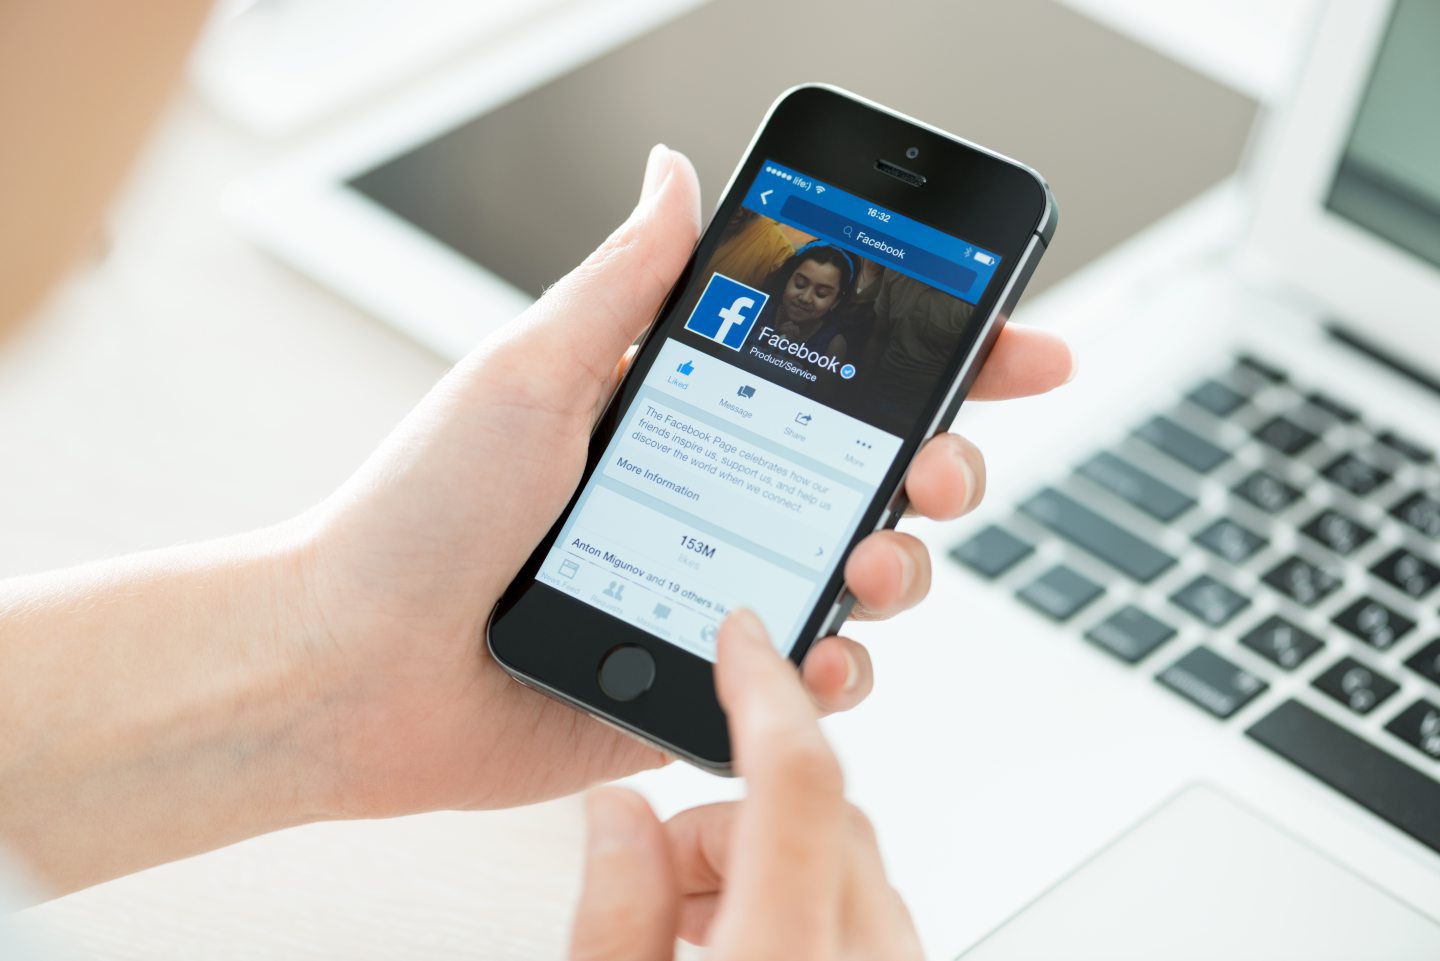 Dr Lydia Krexi and Dr A communicated over Facebook, as well as text and WhatsApp. Image: Shutterstock / Antlii